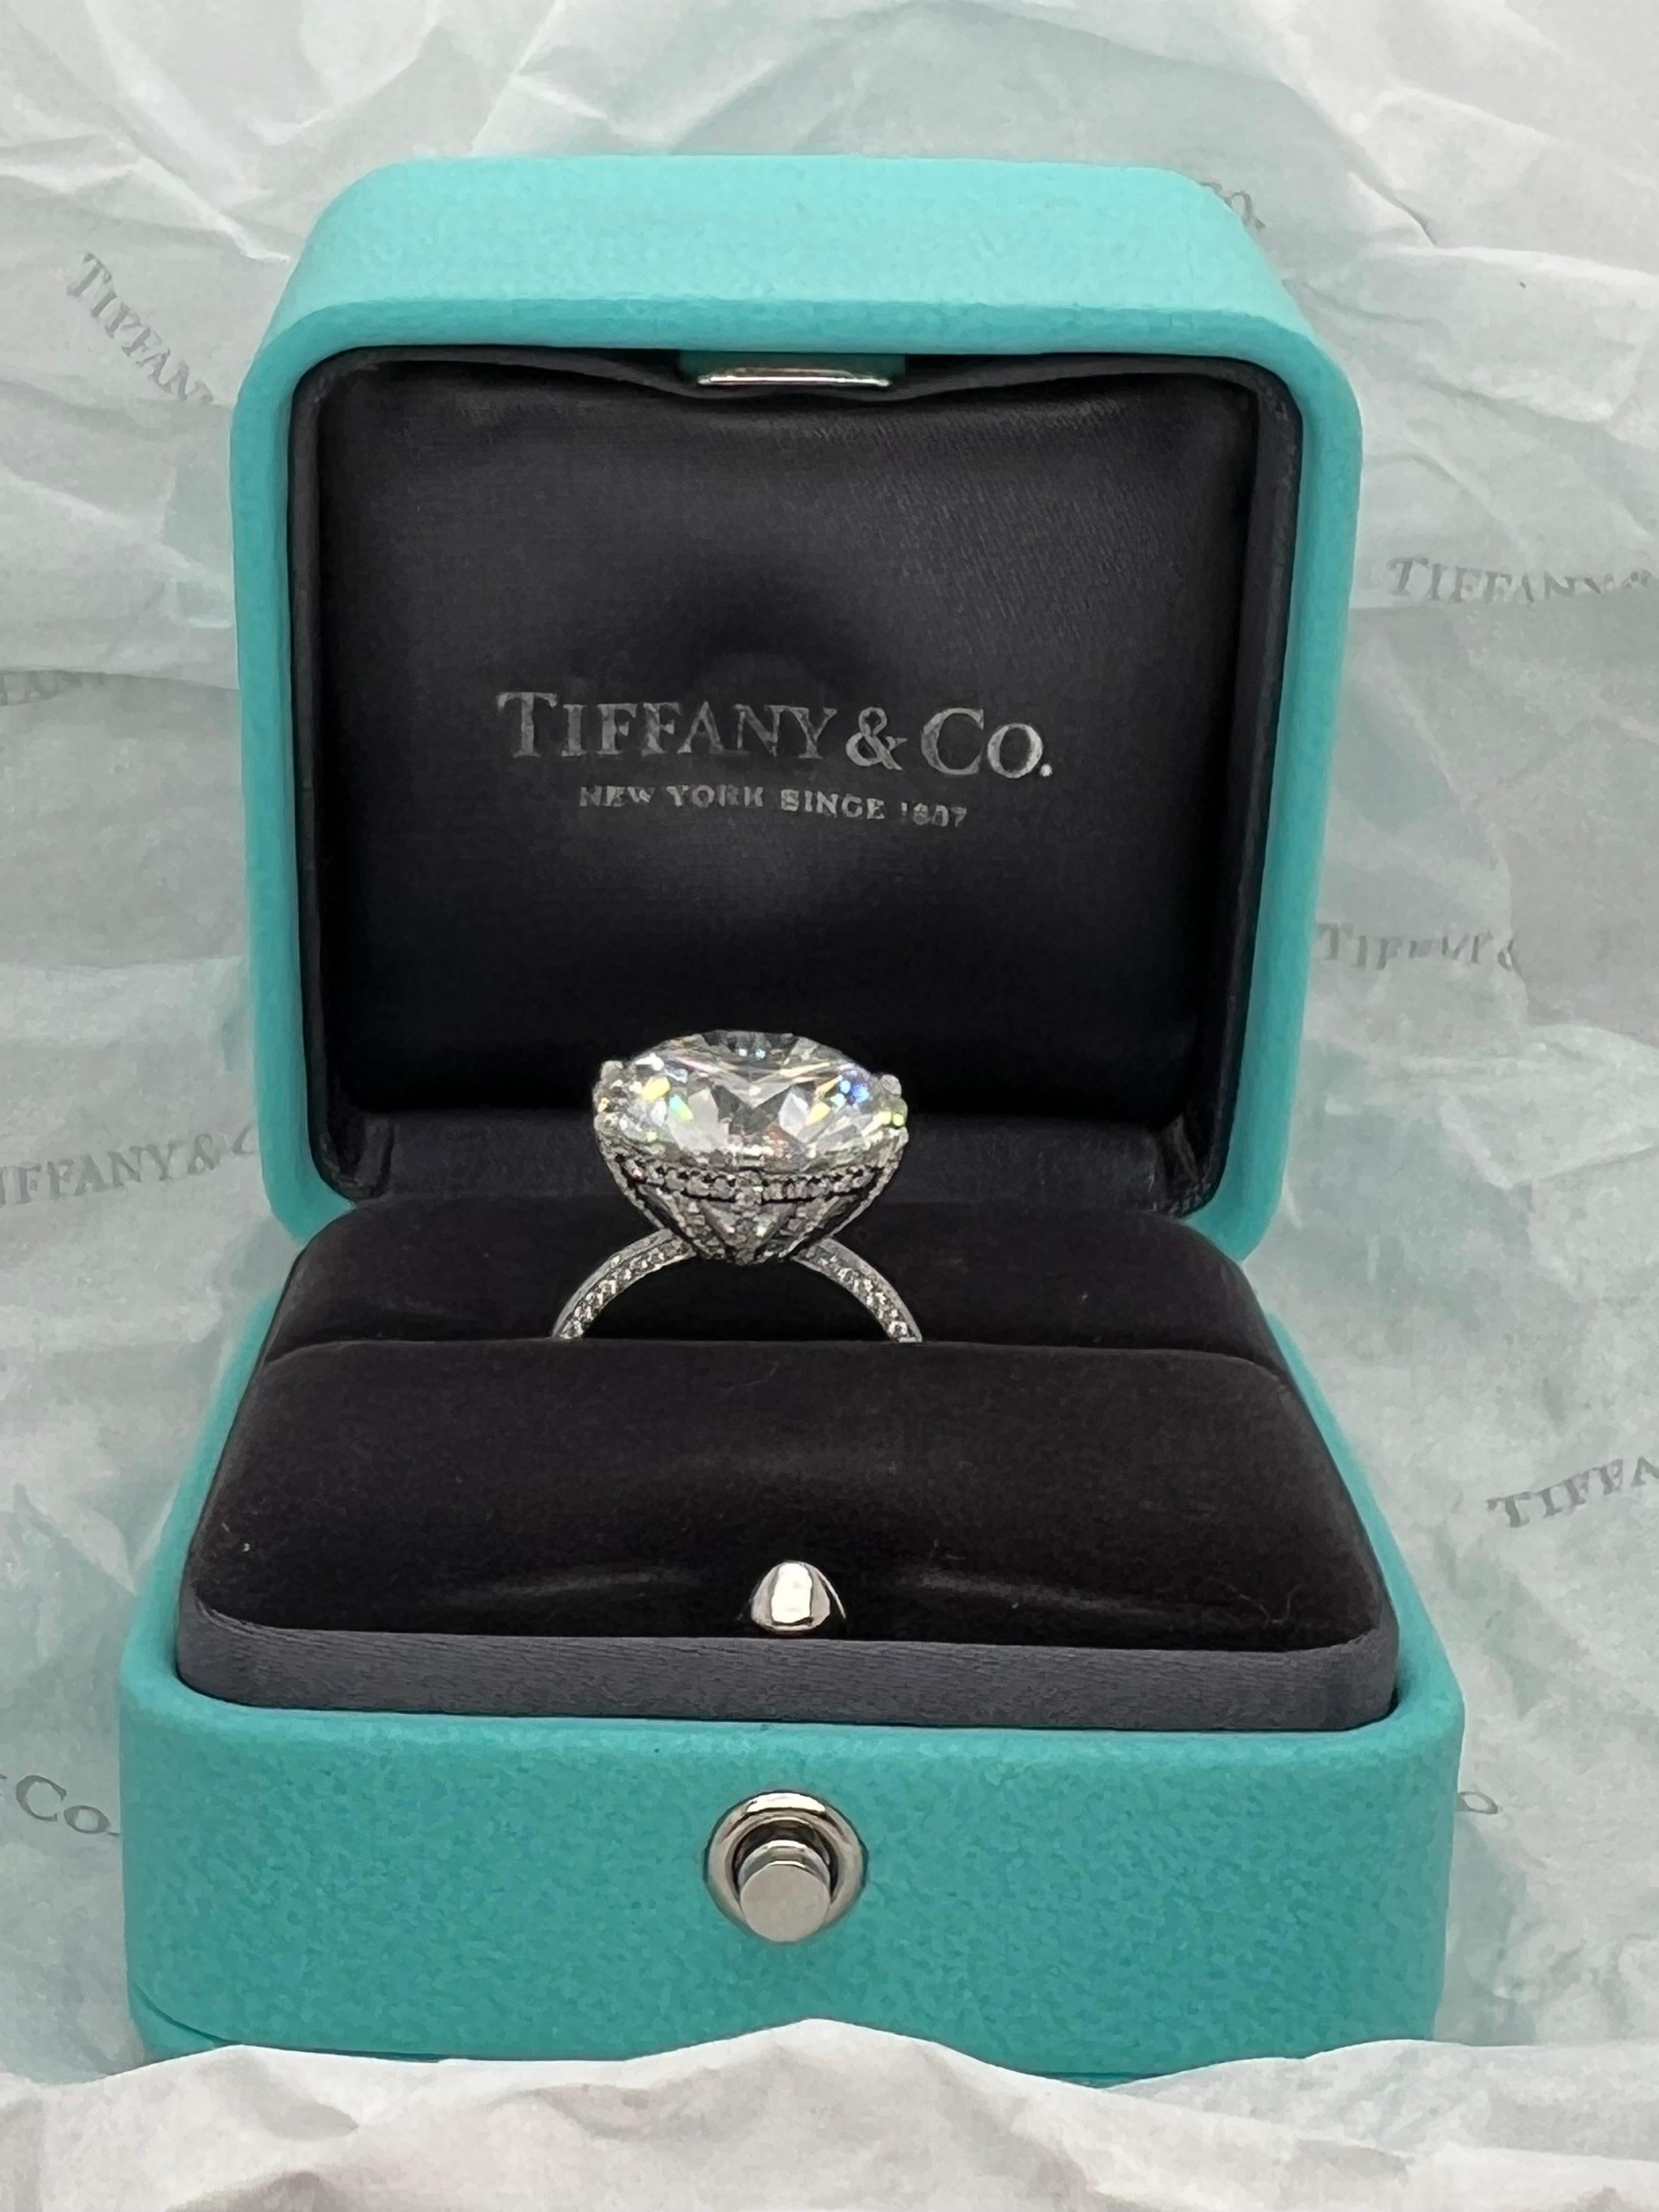 This extraordinary Tiffany & Co. platinum and diamond ring is a true work of art, featuring a stunning 13.02 carat H color VS2 clarity round brilliant cut diamond as the centerpiece. This breathtaking diamond is GIA certified, ensuring that it has